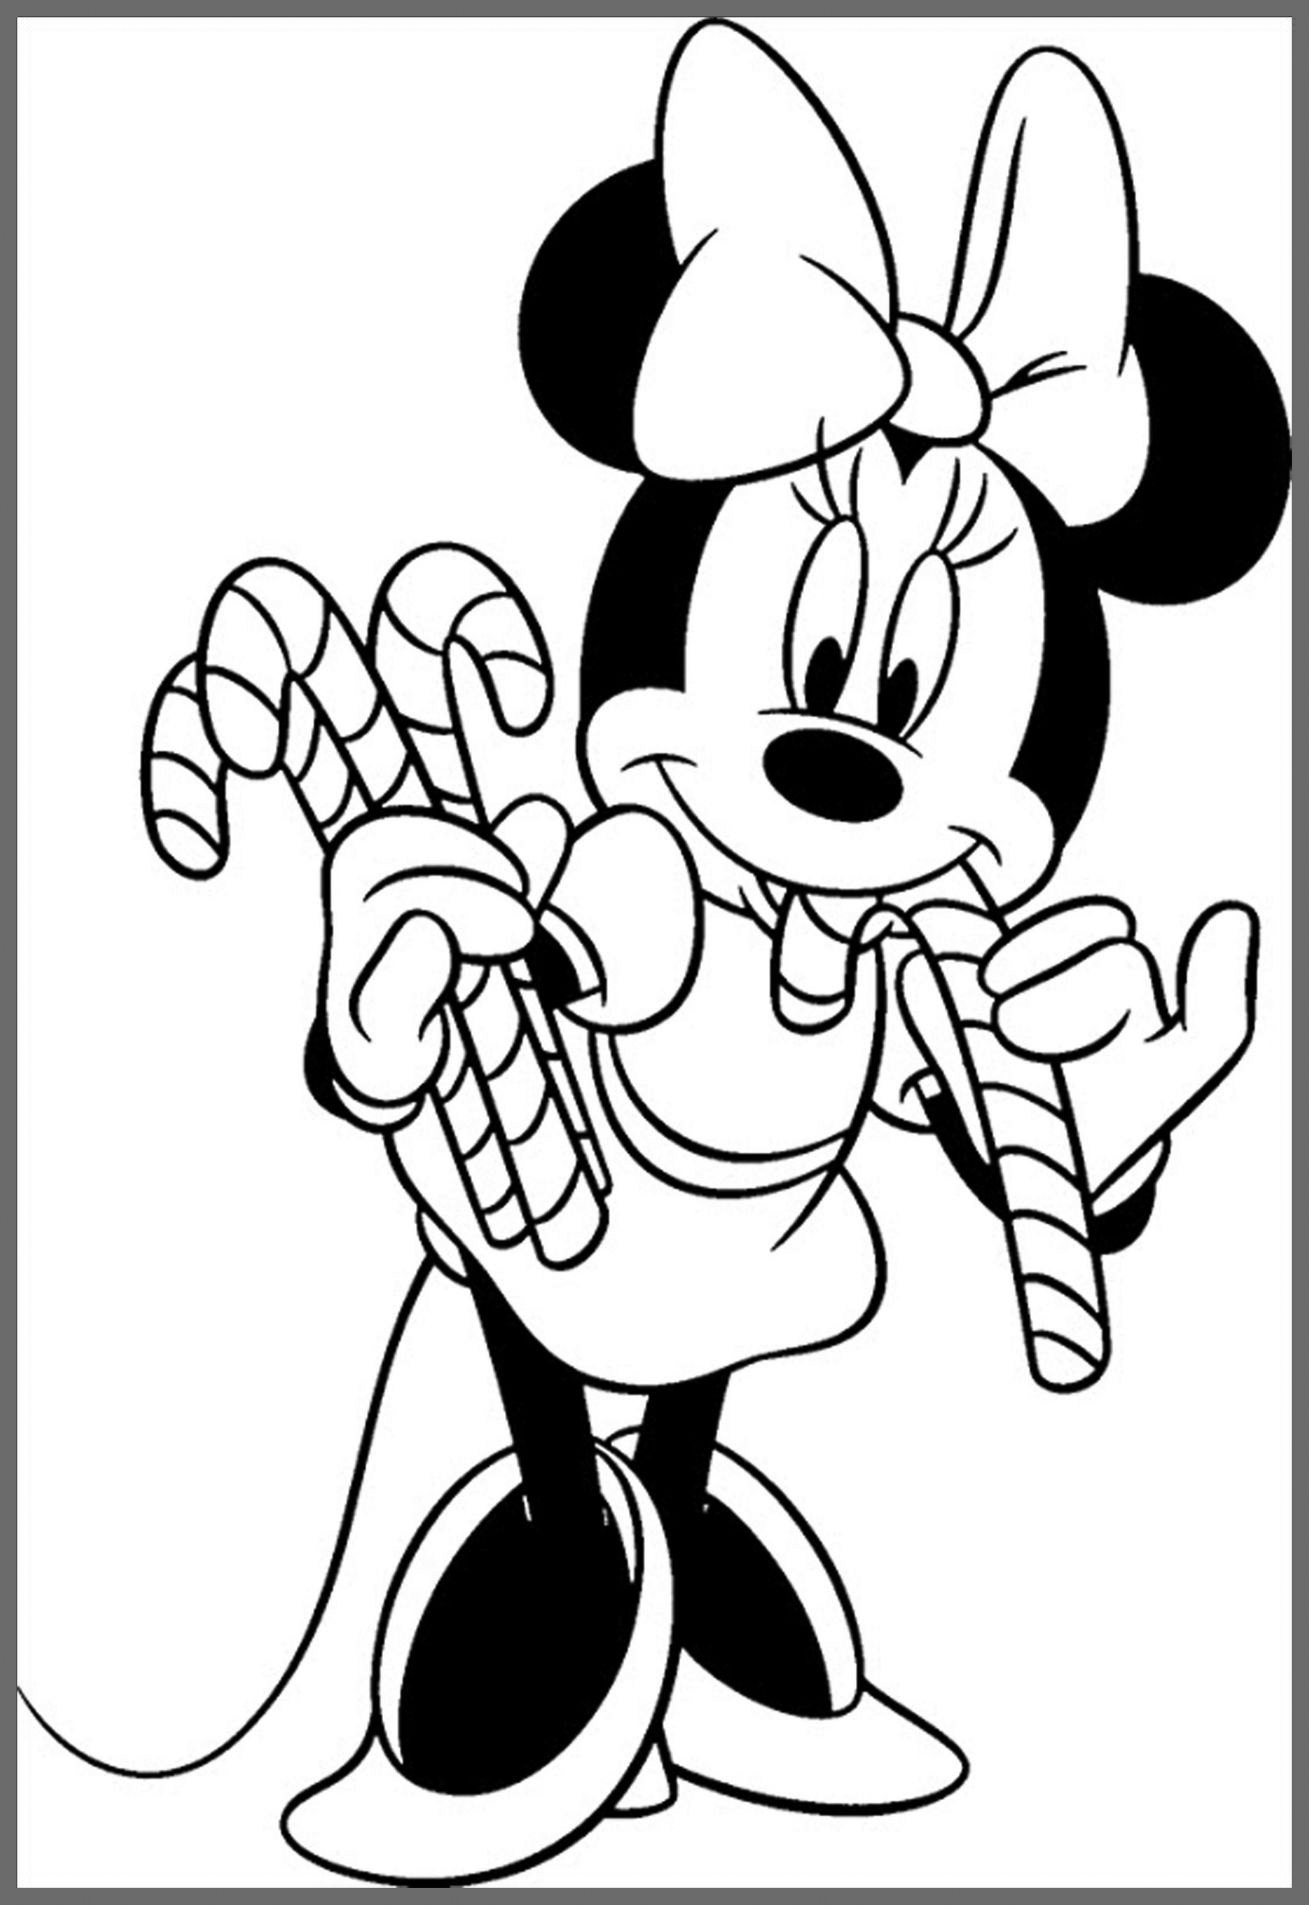 Download Mickey Mouse Christmas Coloring Pages - Best Coloring ...